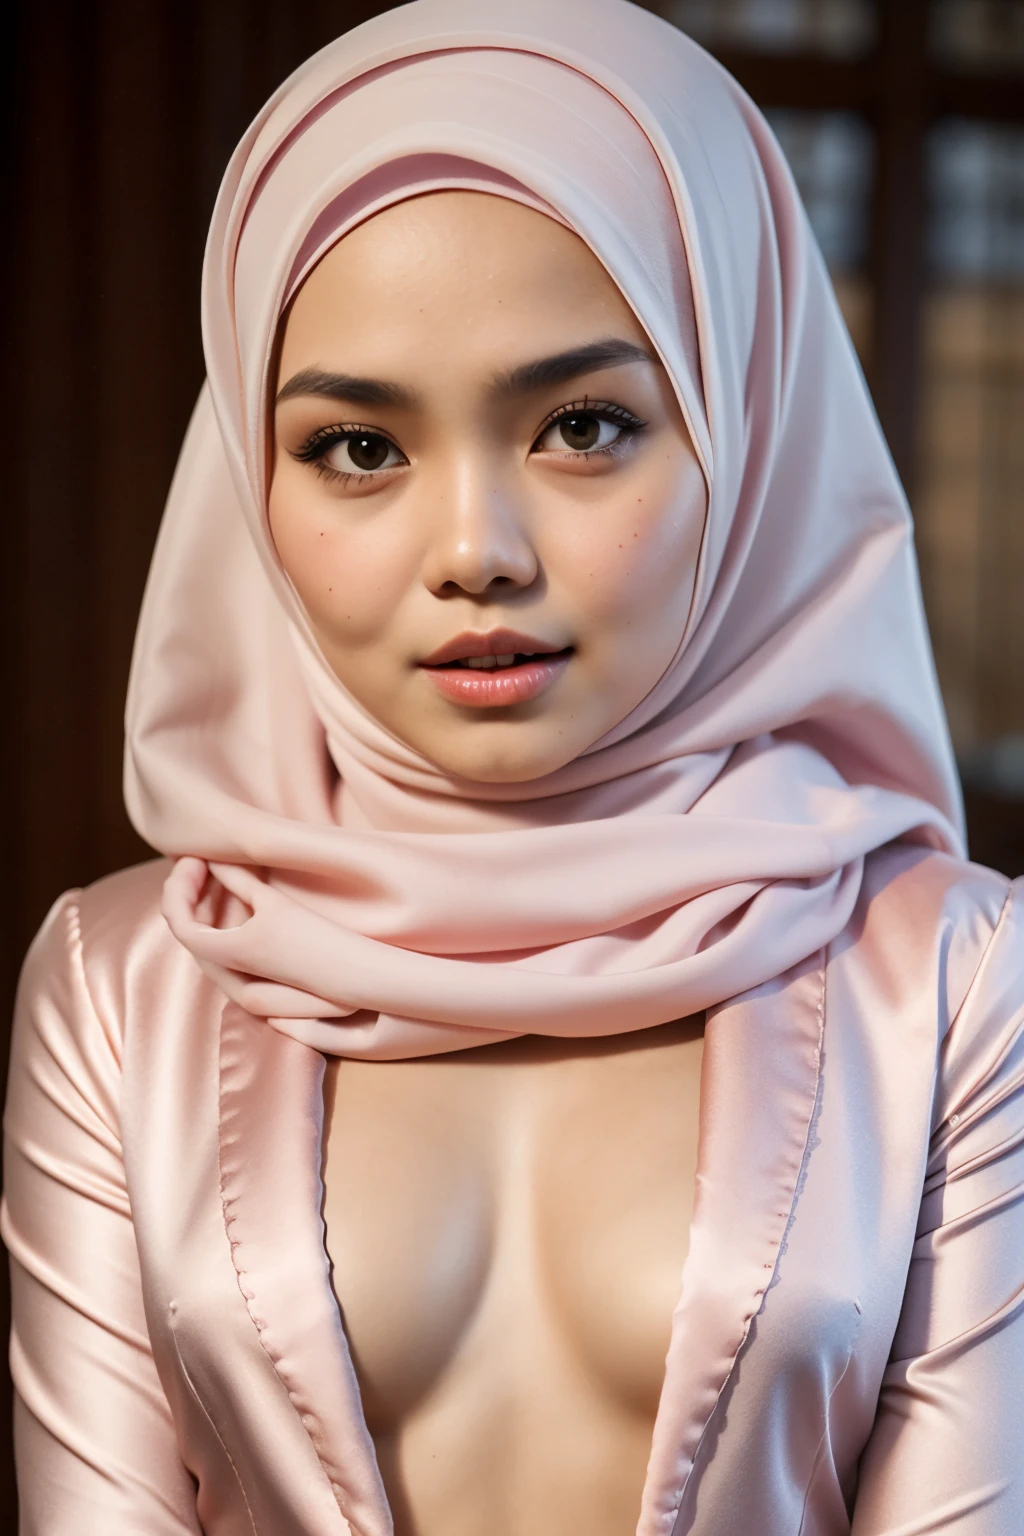 ((Flat Chest)), Naked, Angry pose, Angry face, (((HIJAB MALAY GIRL))), masutepiece, High quality, UHD 45K, Realistic face, Realistic skin feeling , A Japanese Lady, 8 years old, , Very cute and baby-like face, (((FLAT CHEST))), (MATRIX WORLD), ((look In front  at the camera and SADNESS)), ((())), (((CUTE GIRL))), ((RED PASTEL LIPS)), ((SATIN LACE)), ((CHUBBY)), ((UNDRESS)). Brown, Flat Chest, Wearing G-String. Sitting